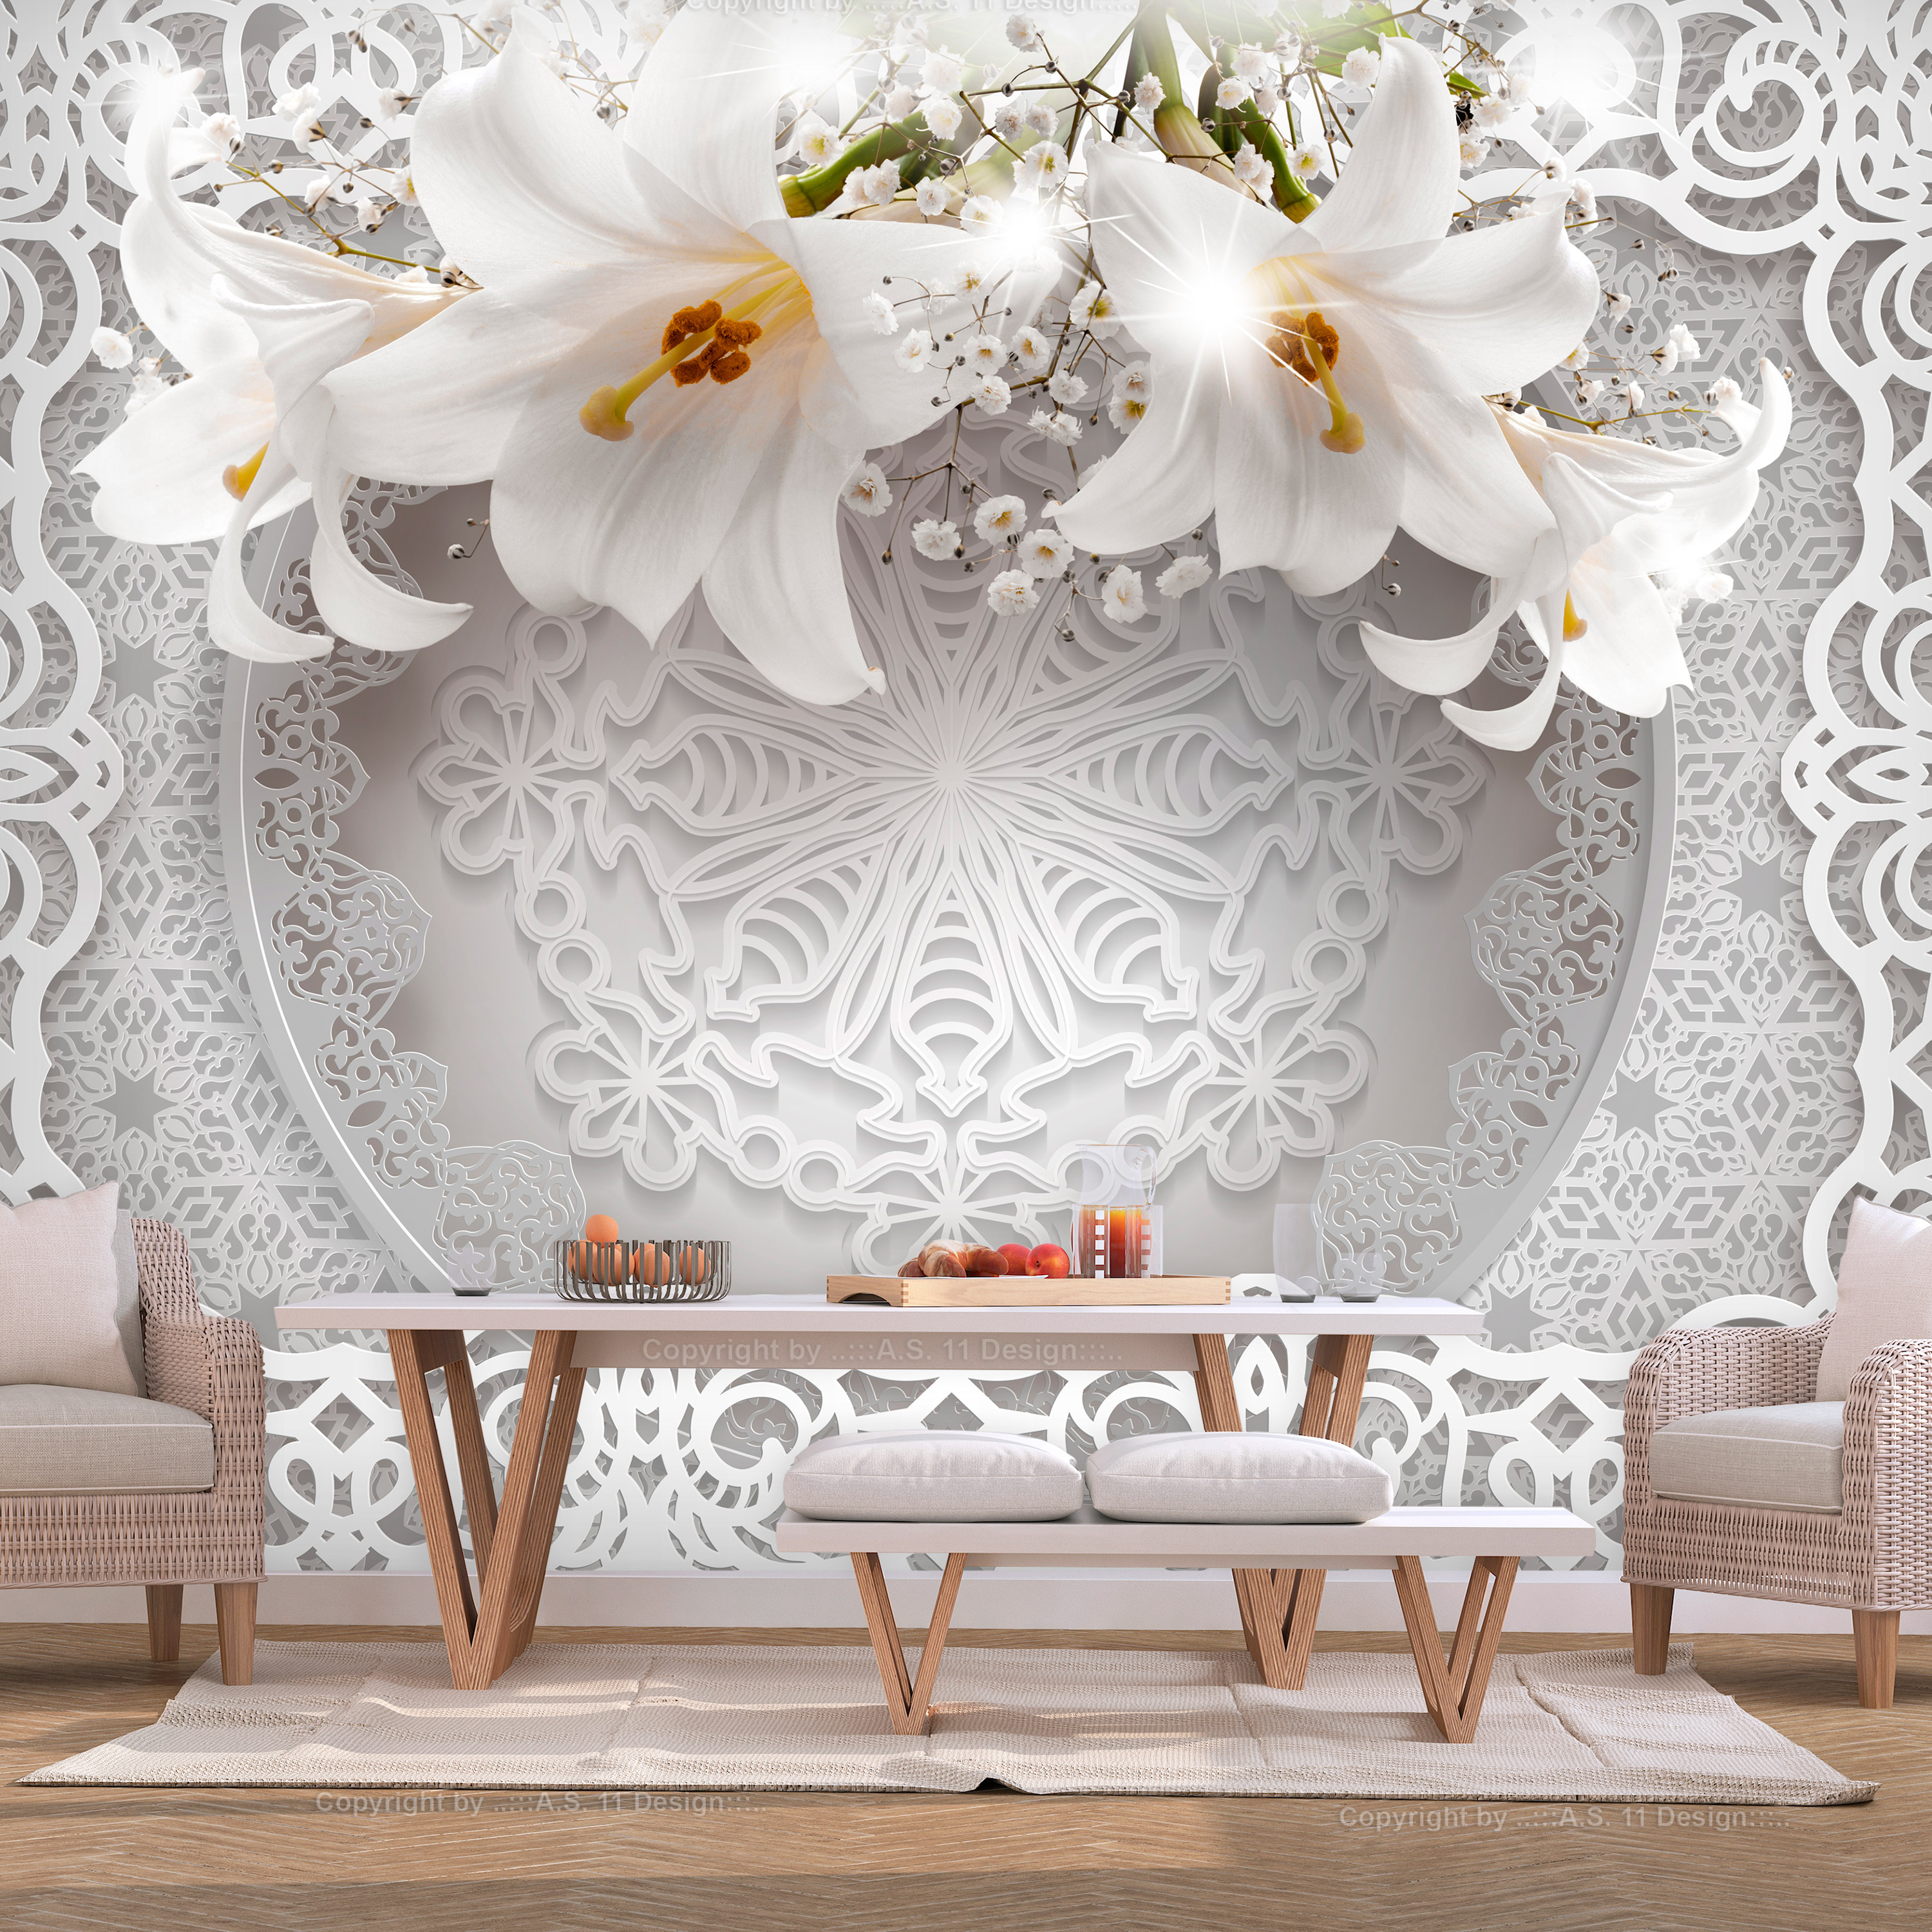 Self-adhesive Wallpaper - Lilies and Ornaments - 441x315